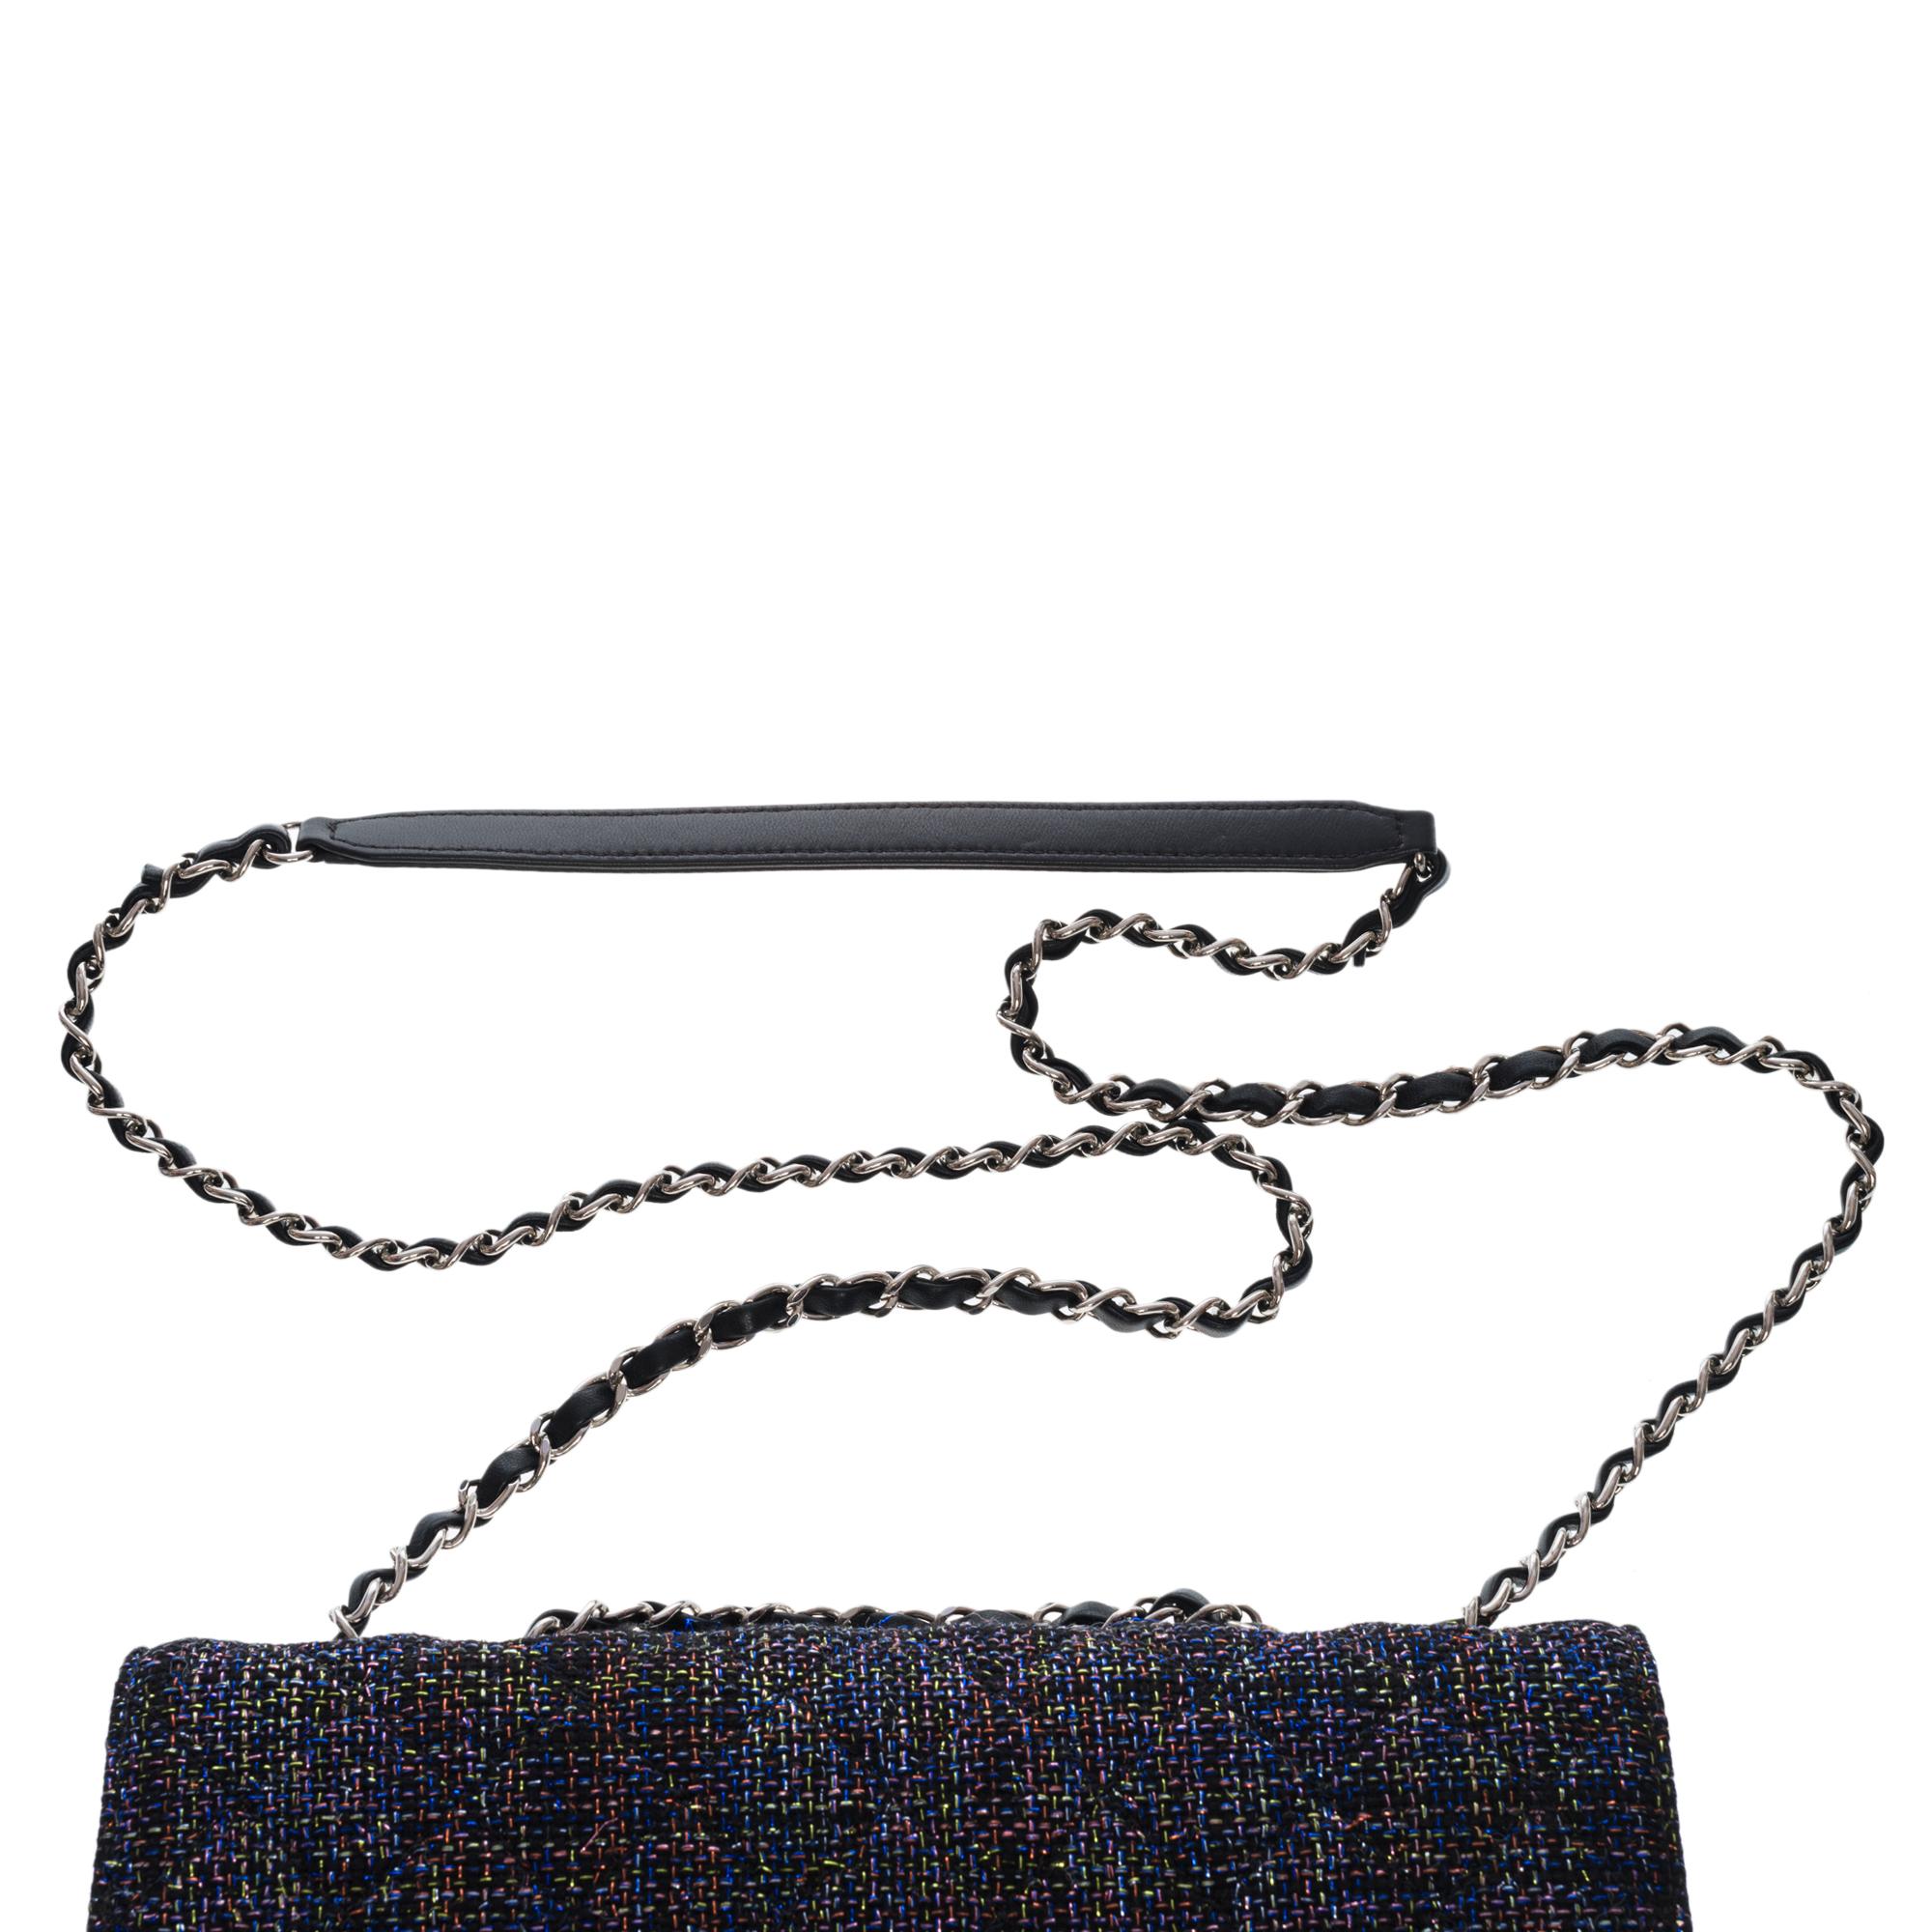 Rare Chanel Classic Flap shoulder Bag in black Tweed and glittery threads, SHW 4